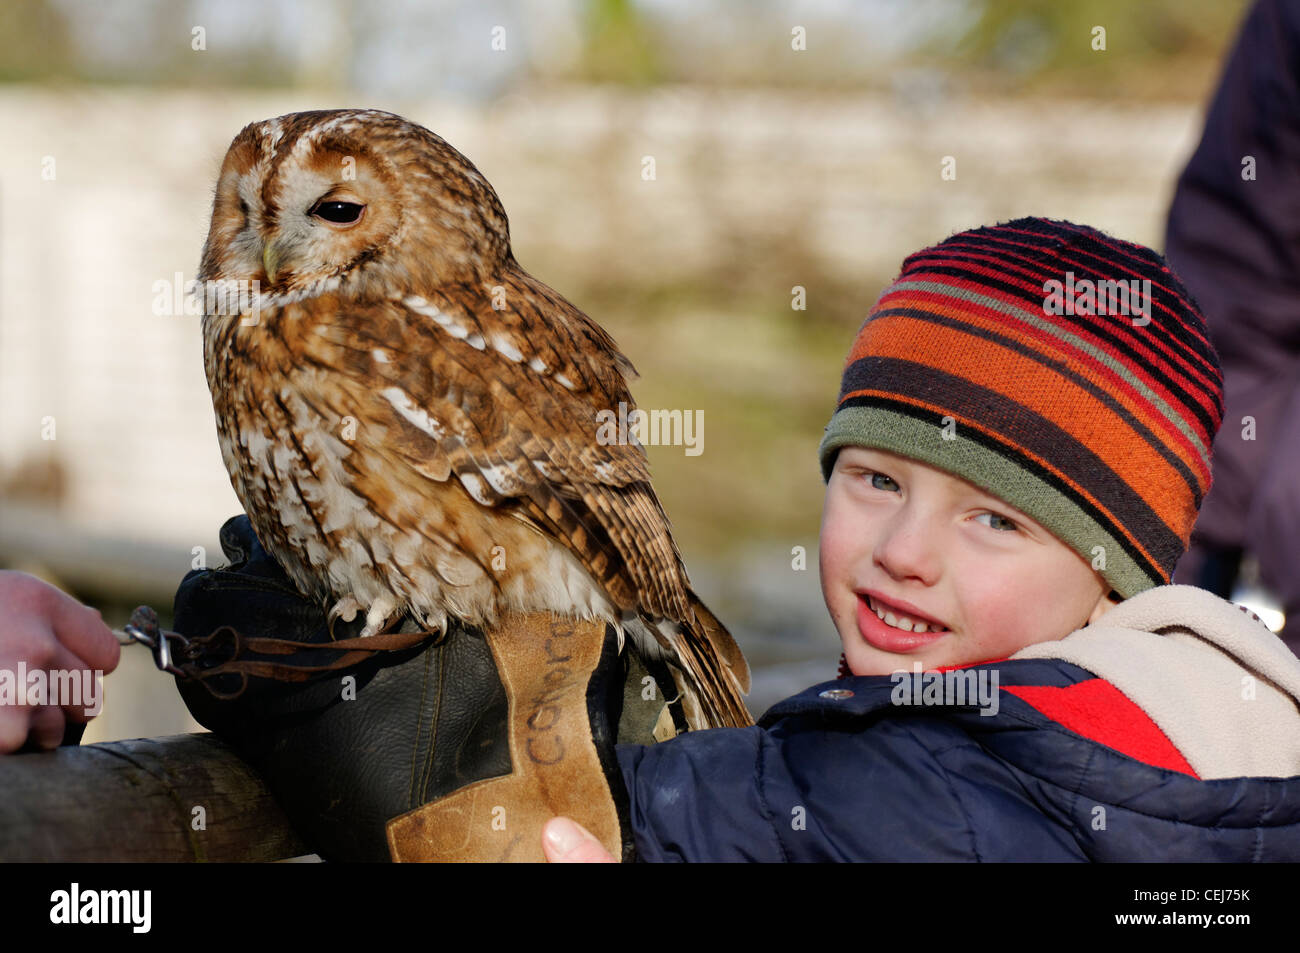 A young boy holding a Tawny Owl on his wrist Stock Photo